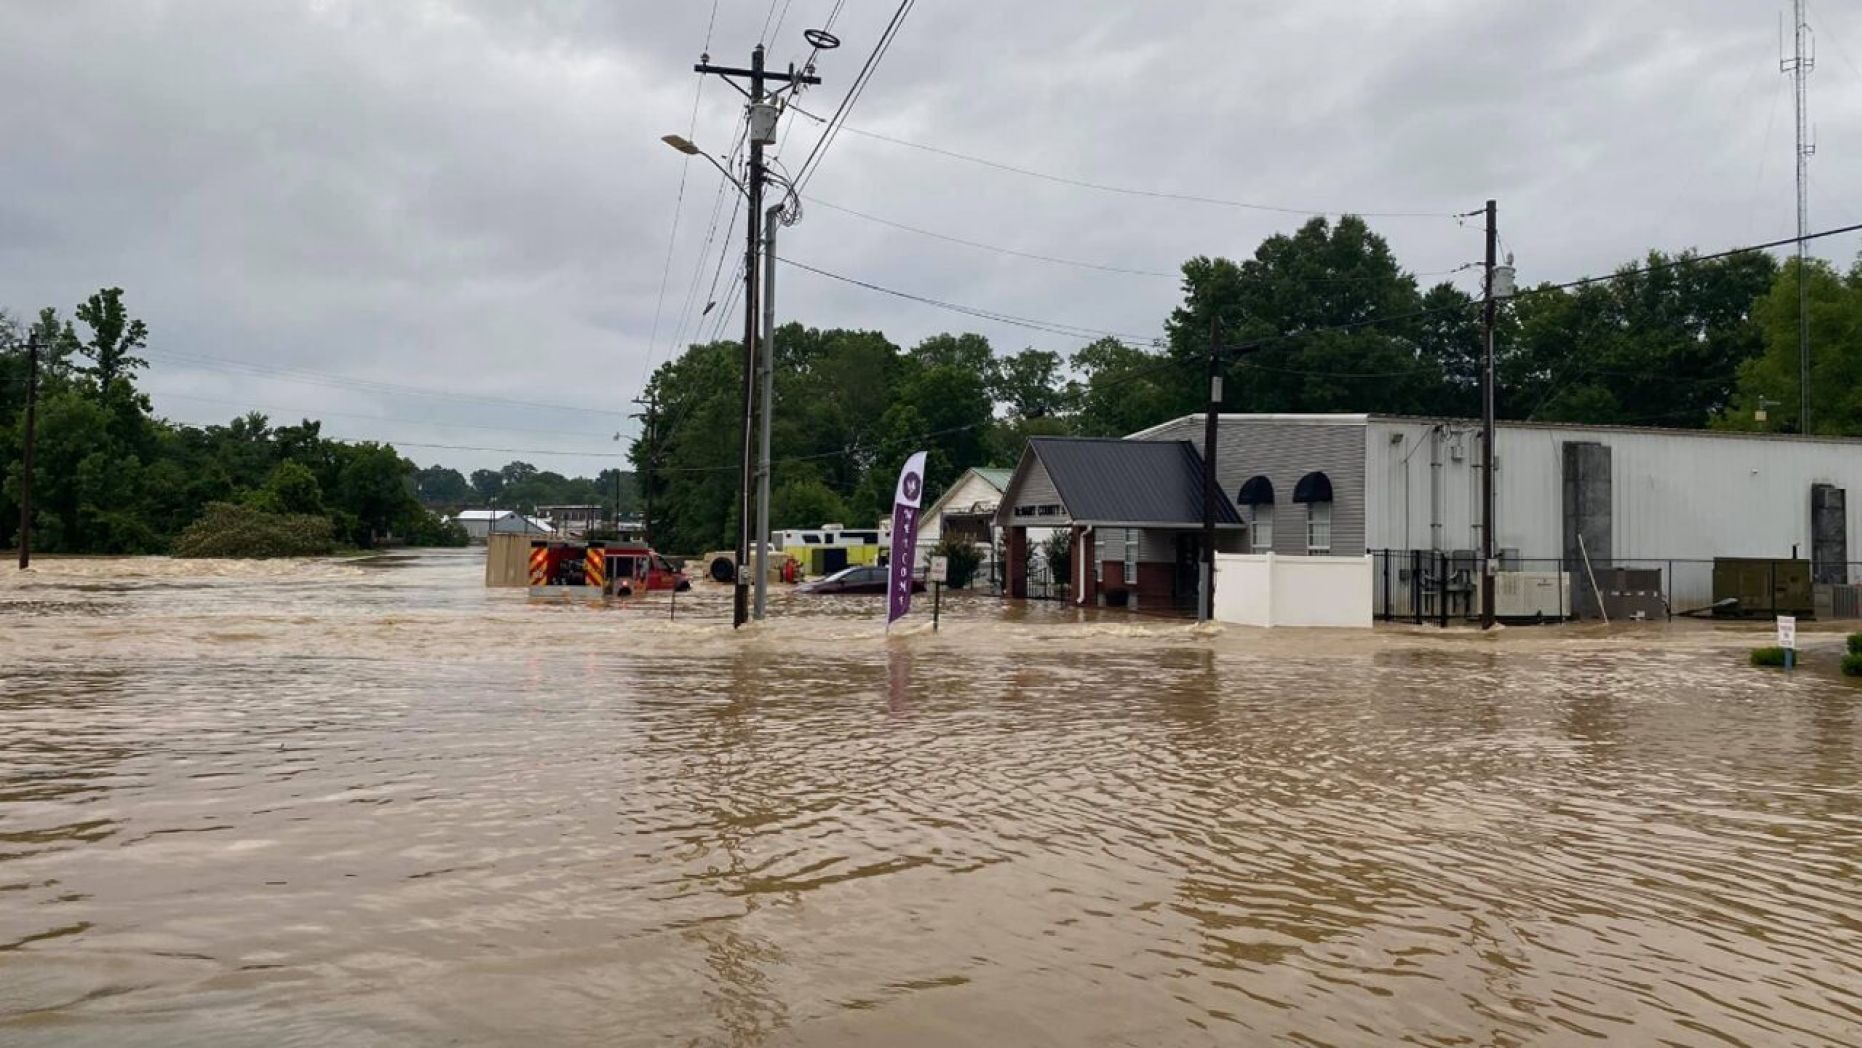 Severe flash flooding was reported Wednesday in the town of Selmer, Tenn.